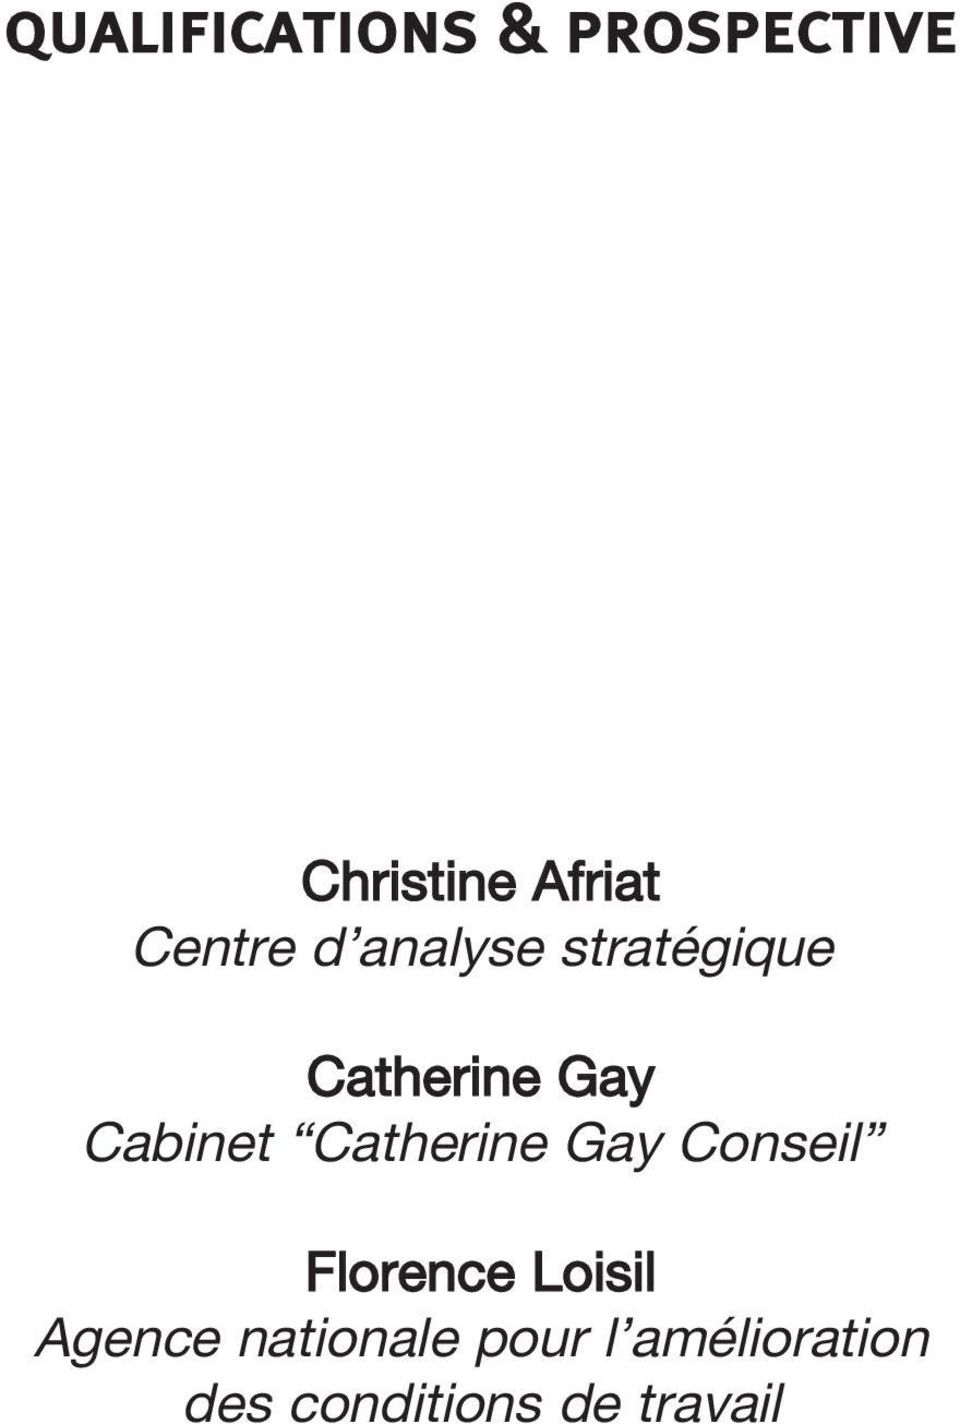 Cabinet Catherine Gay Conseil Florence Loisil